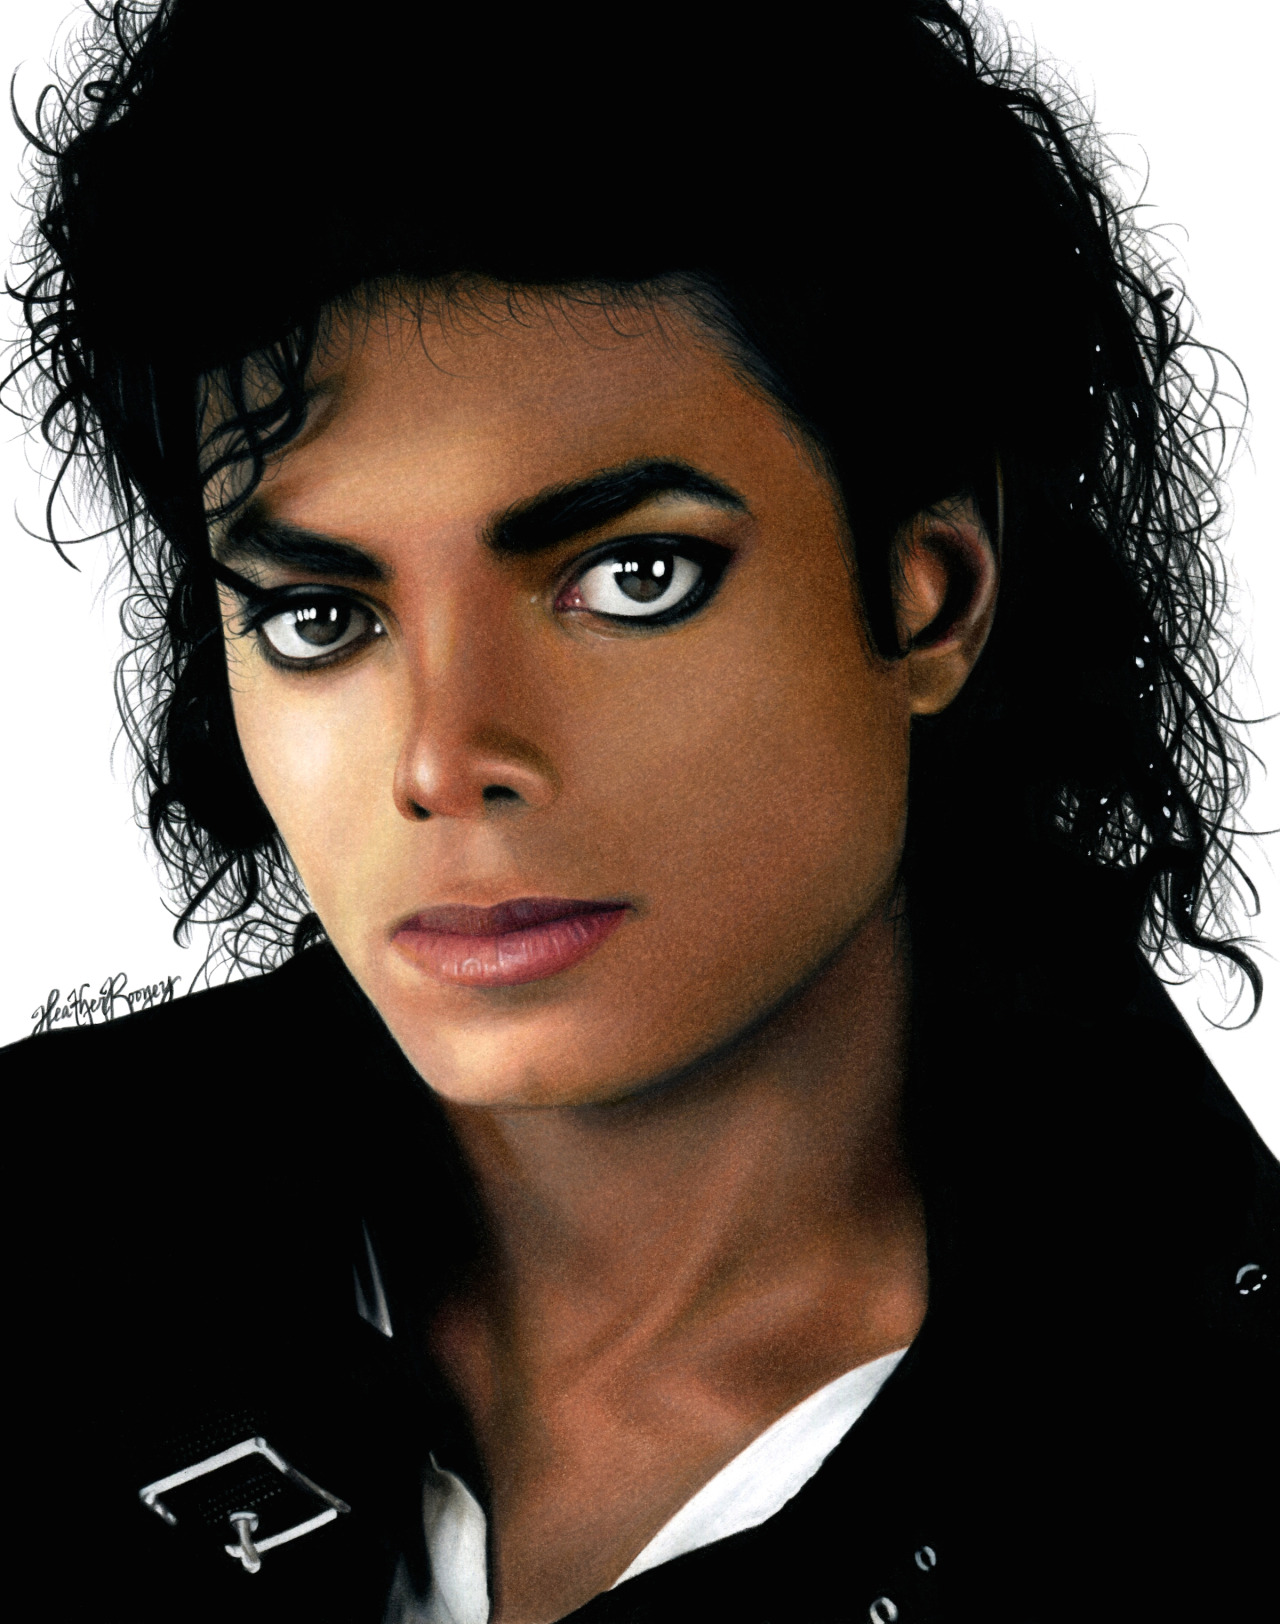 Drawing Of King Of Pop Michael Jackson (RIP) Pictures, Photos, and Images  for Facebook, Tumblr, Pinterest, and Twitter